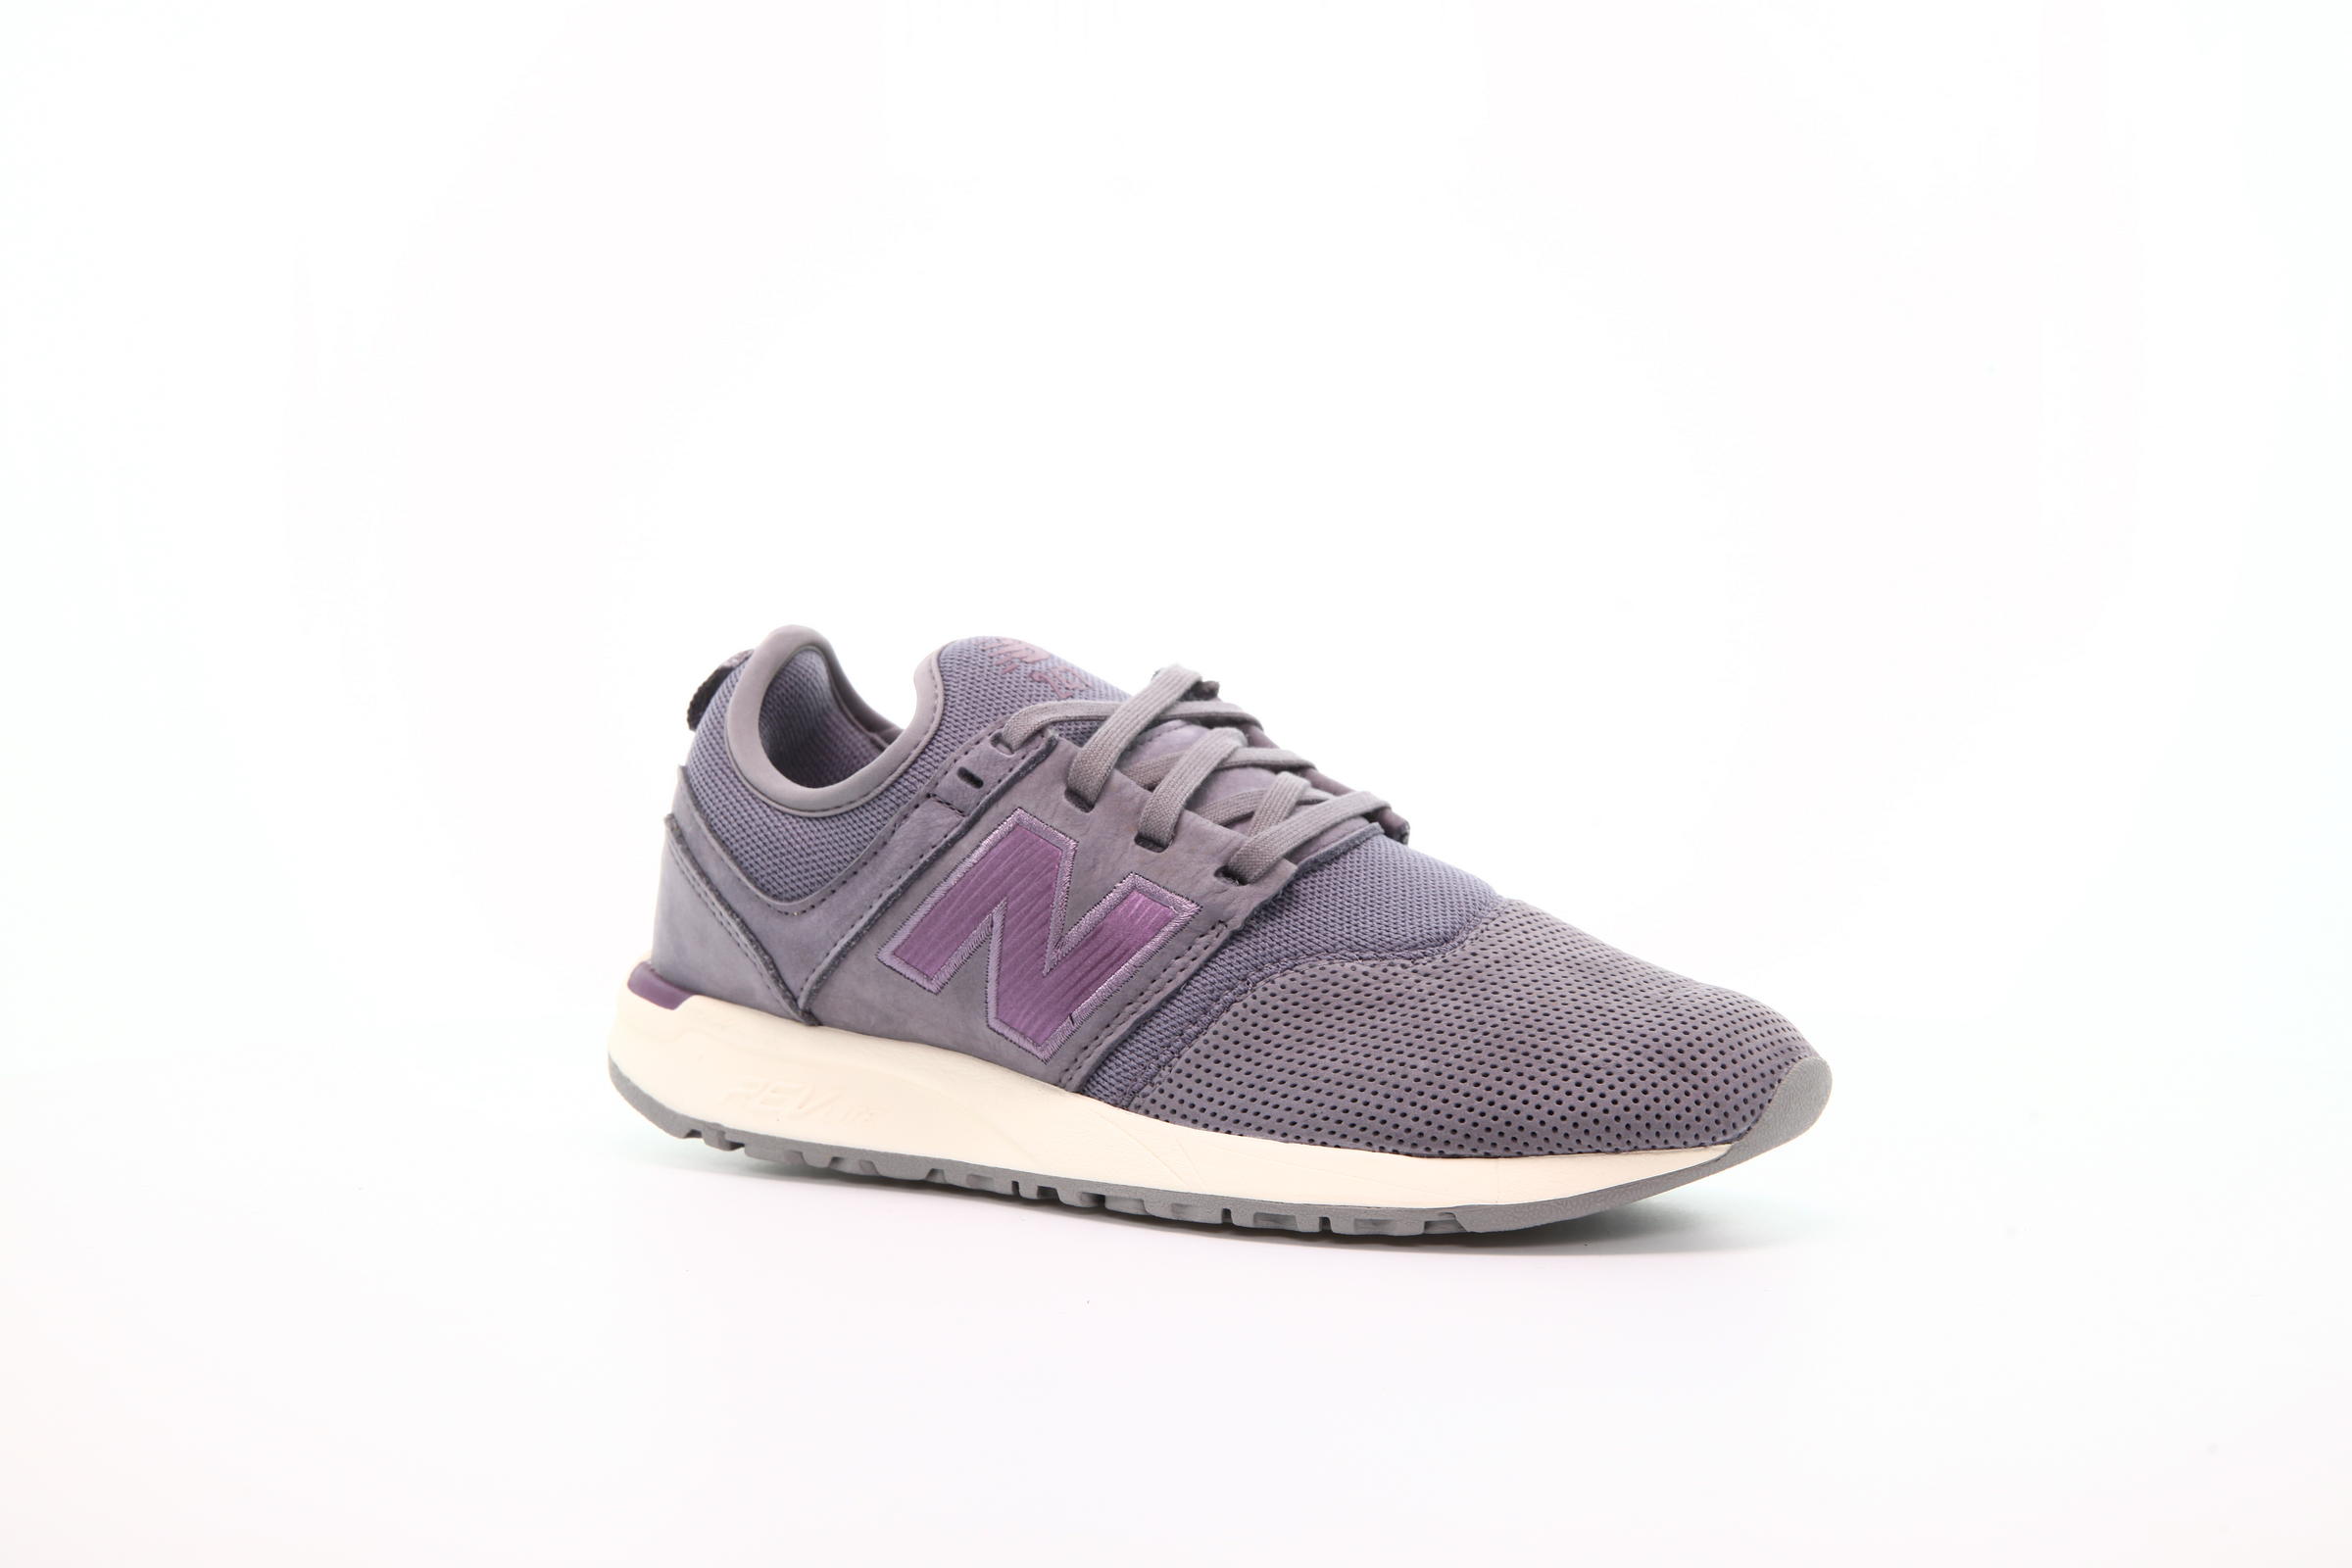 New Balance WRL 247 Luxe Pack "Strata"